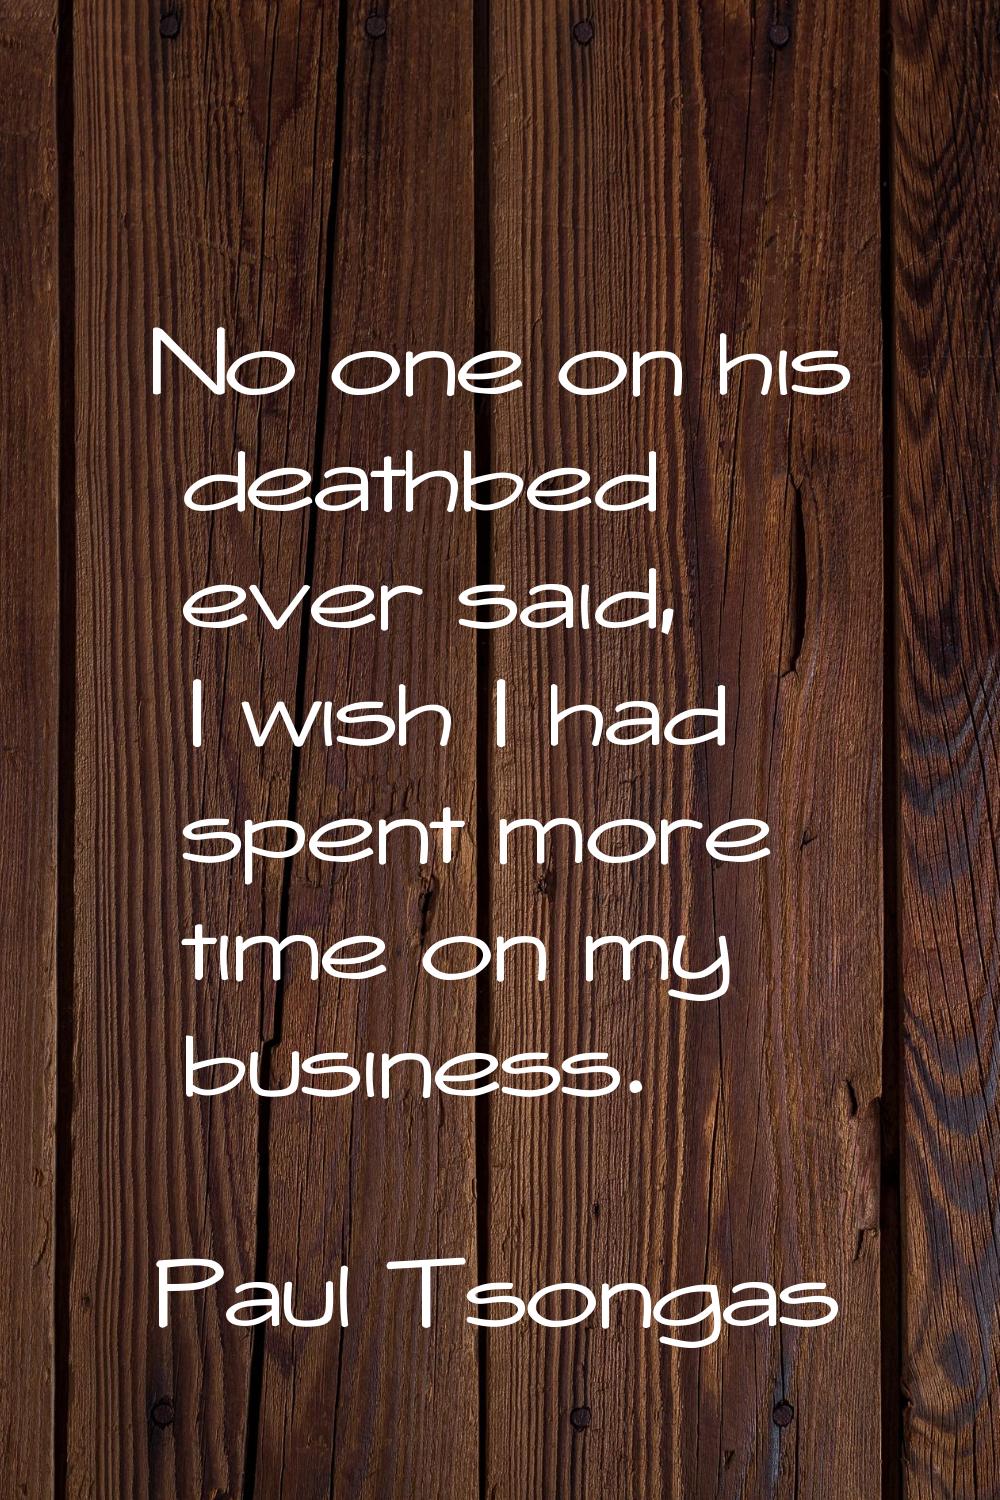 No one on his deathbed ever said, I wish I had spent more time on my business.